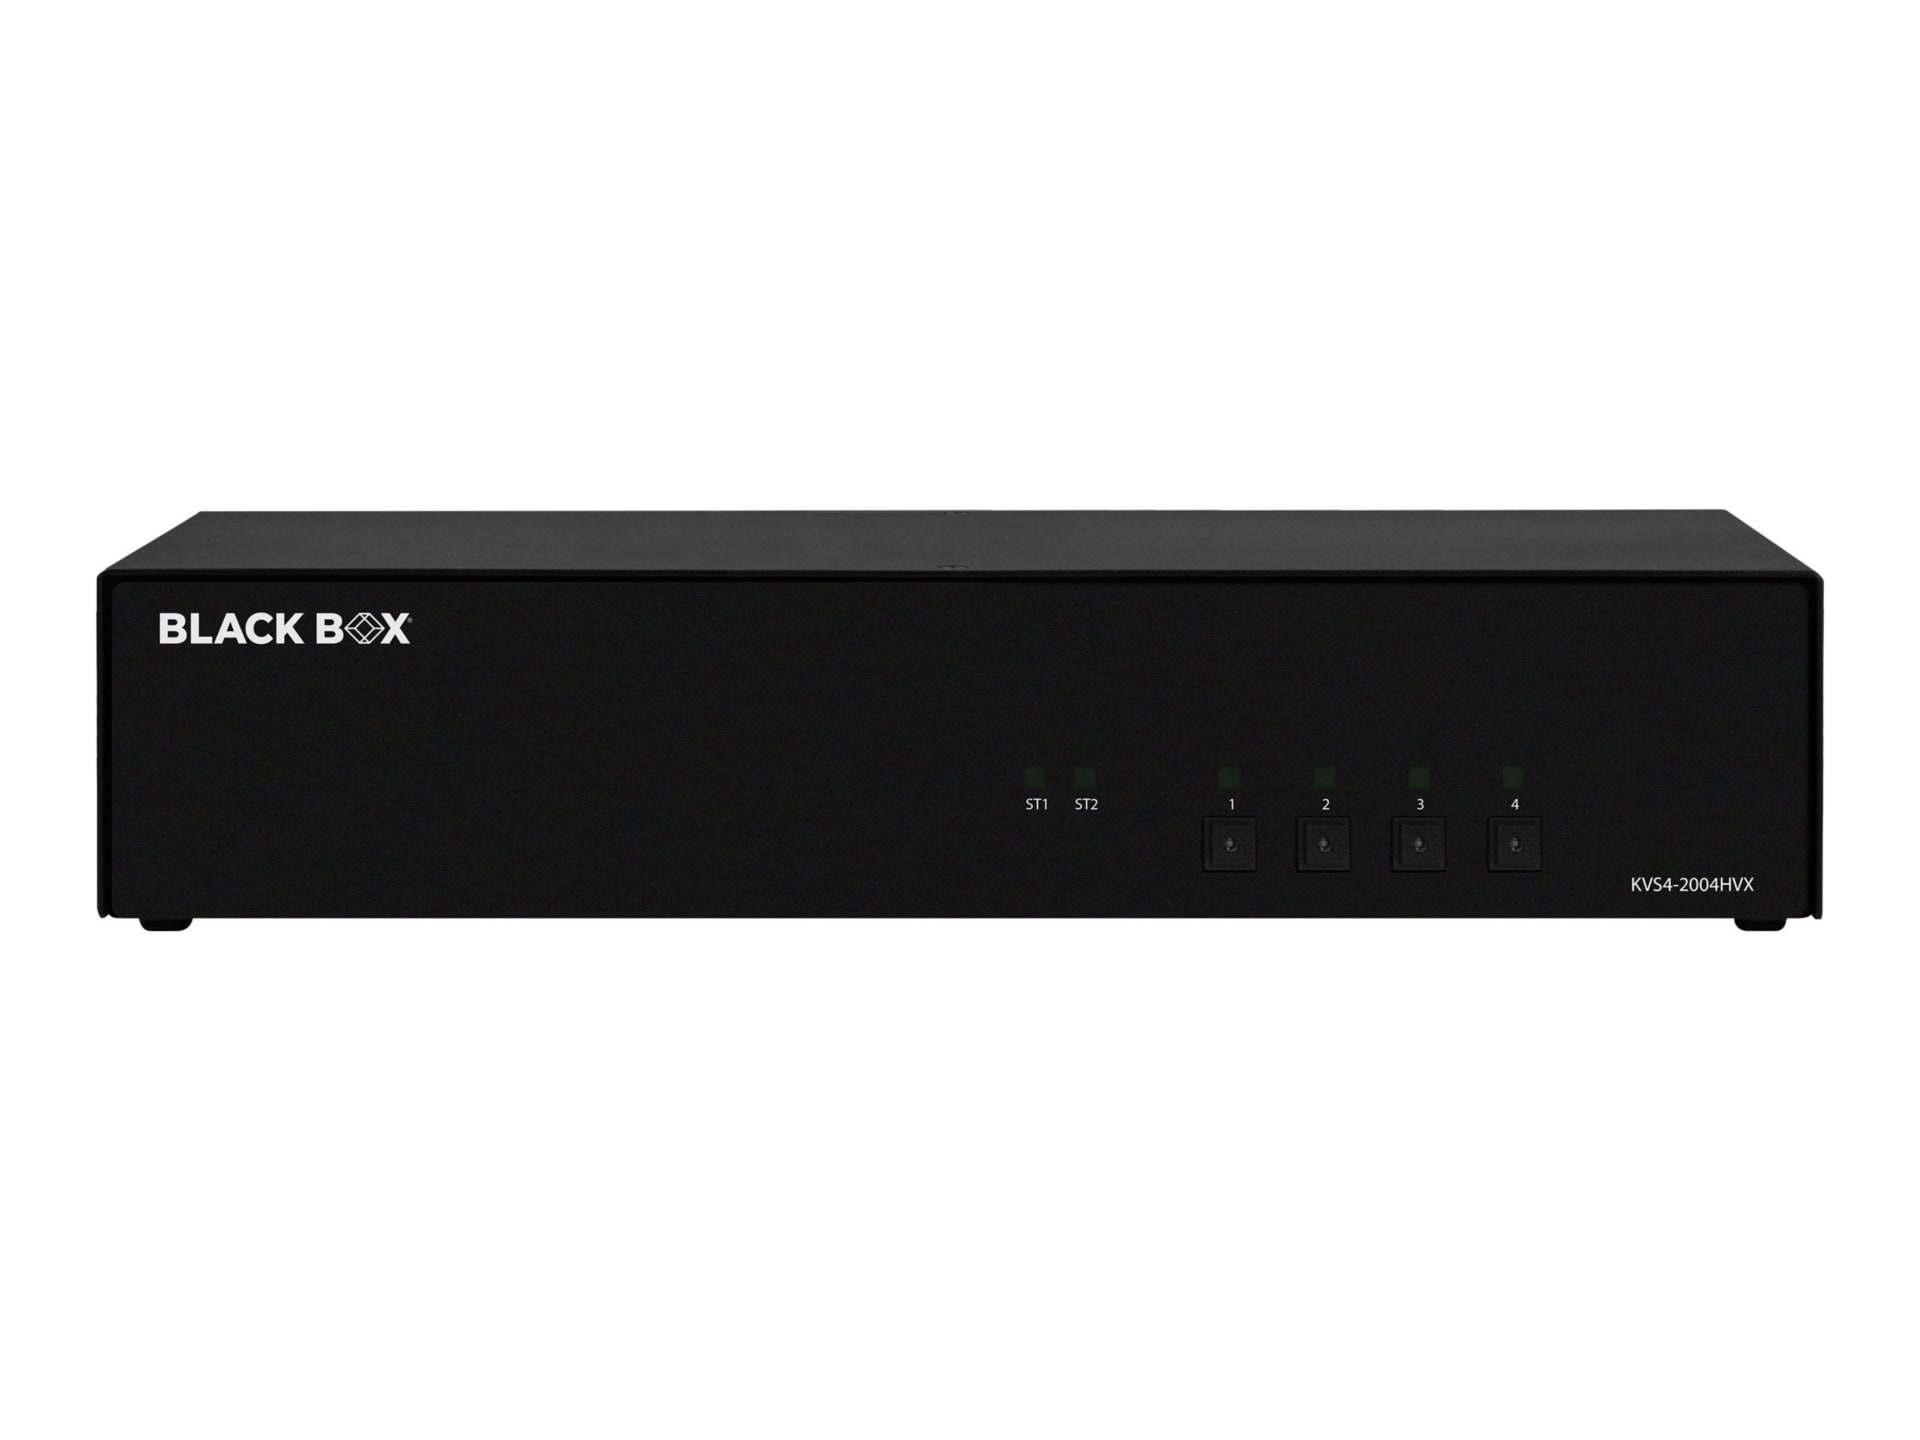 Shop NIAP 4.0 Certified Secure KVM Switches